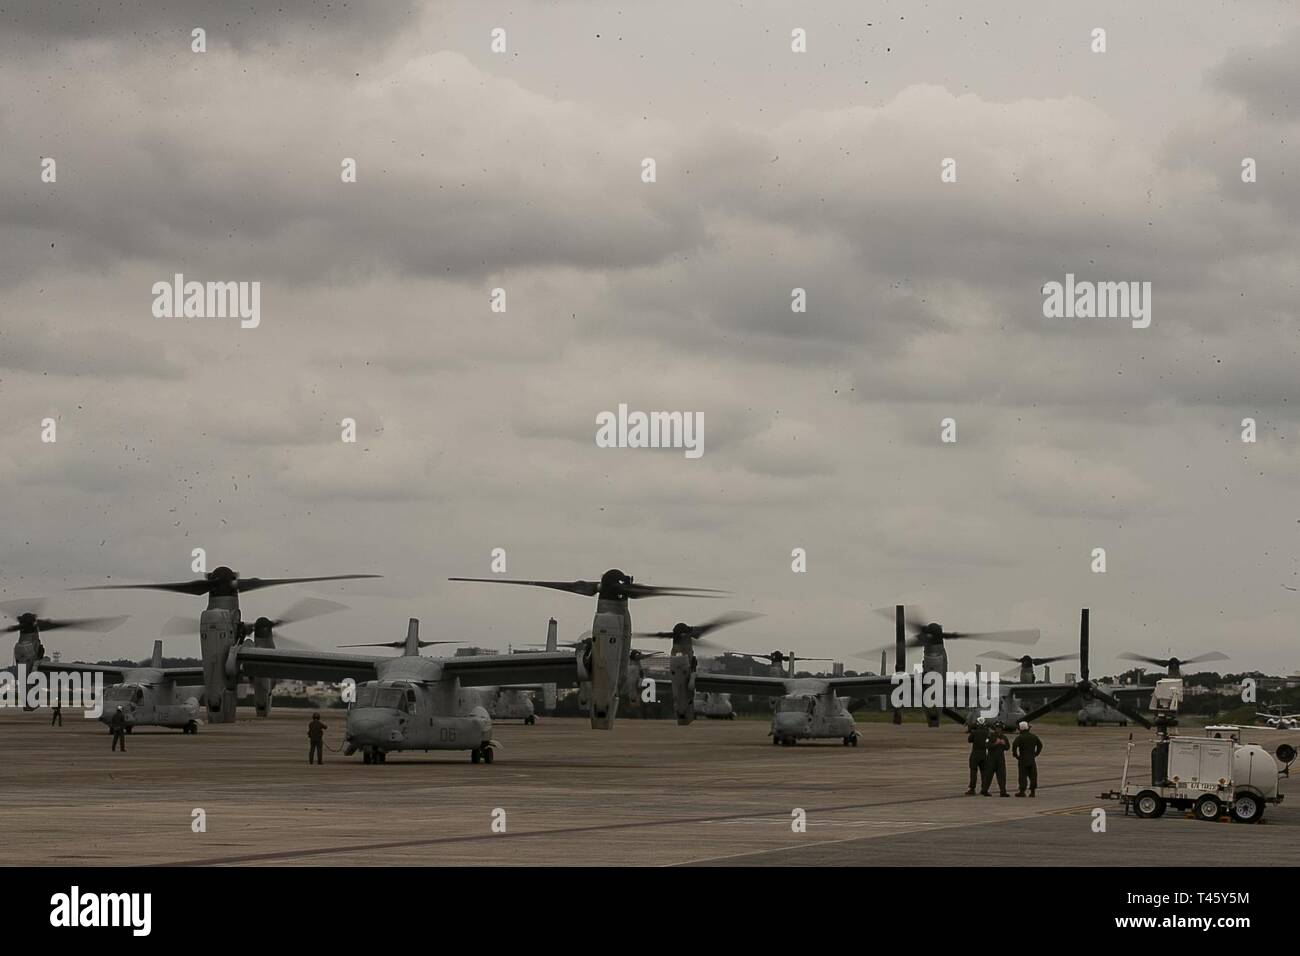 MV-22B Osprey tiltrotor aircraft belonging to Marine Medium Tiltrotor Squadron 262 (Reinforced) idle before flight atop the flight line at Marine Corps Air Station Futenma, Okinawa, Japan, March 11, 2019. VMM-262 (Rein.) is the Aviation Combat Element for the 31st Marine Expeditionary Unit. Marines with the 31st MEU are conducting simulated EABO in a series of dynamic training events to refine their ability to plan, rehearse and complete a variety of missions. During EABO, the 31st MEU partnered with the 3rd Marine Division, 3rd Marine Logistics Group and 1st Marine Aircraft Wing, and airmen w Stock Photo